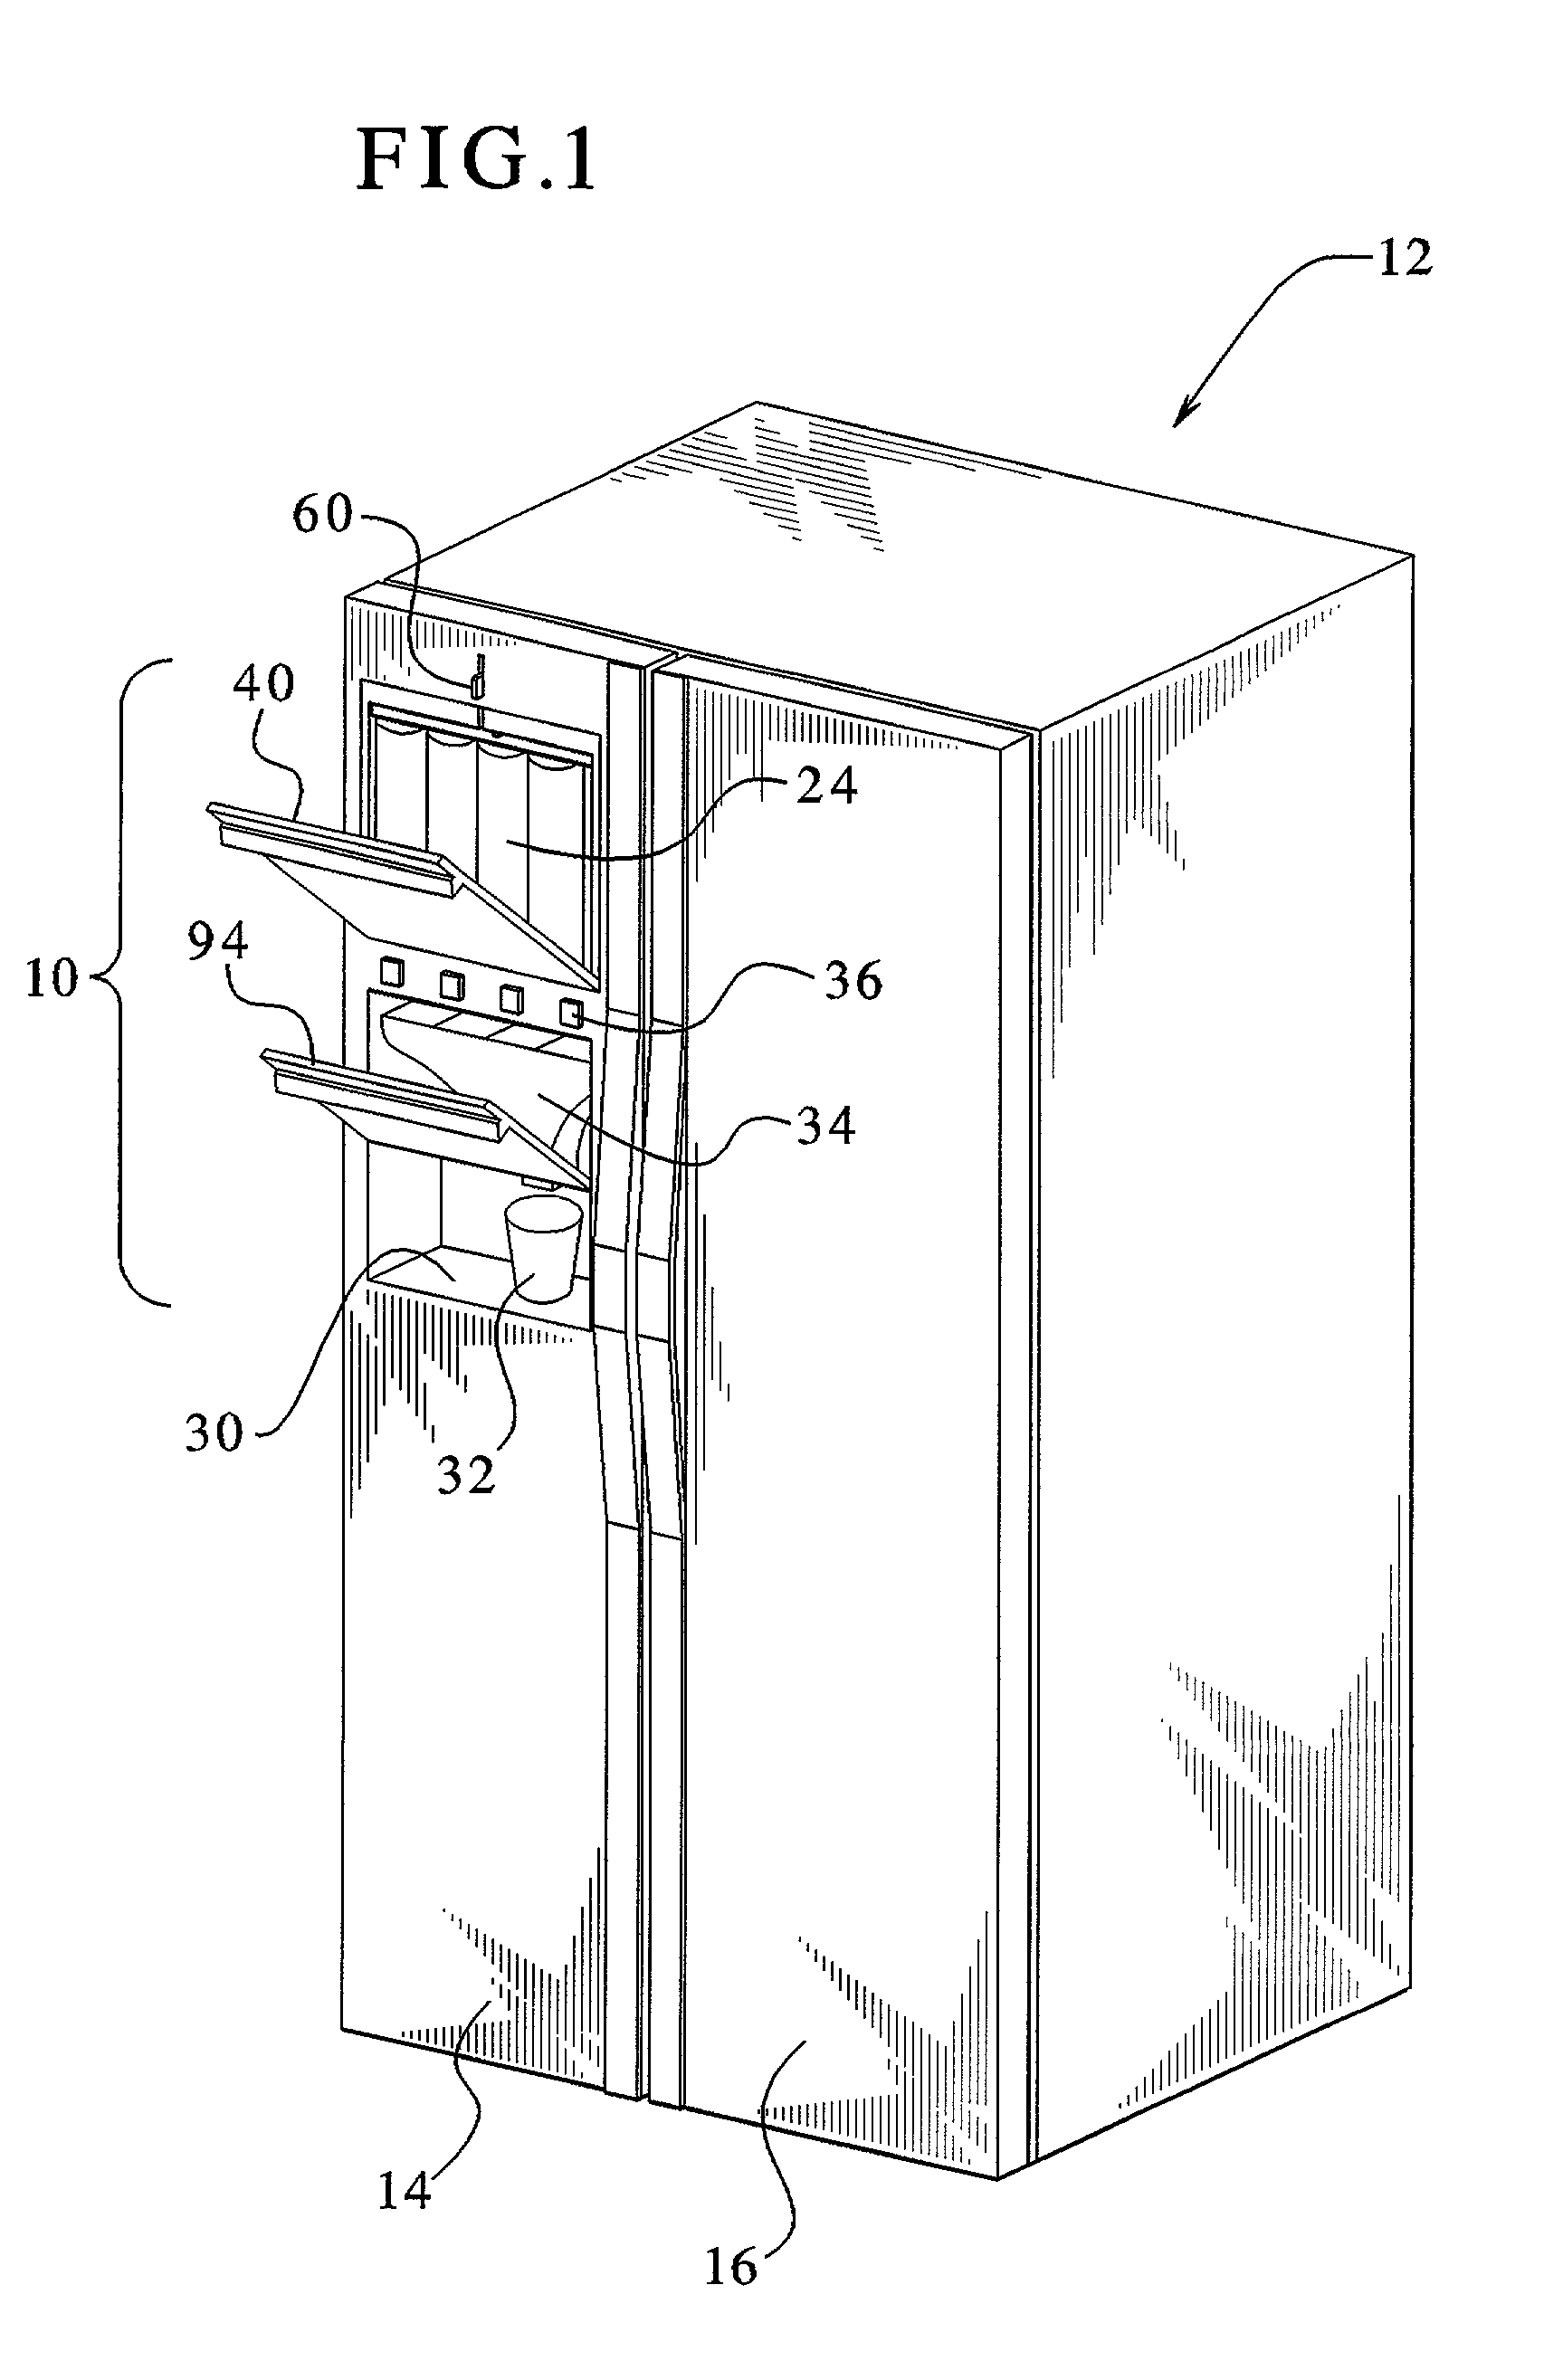 Drink supply canister for beverage dispensing apparatus